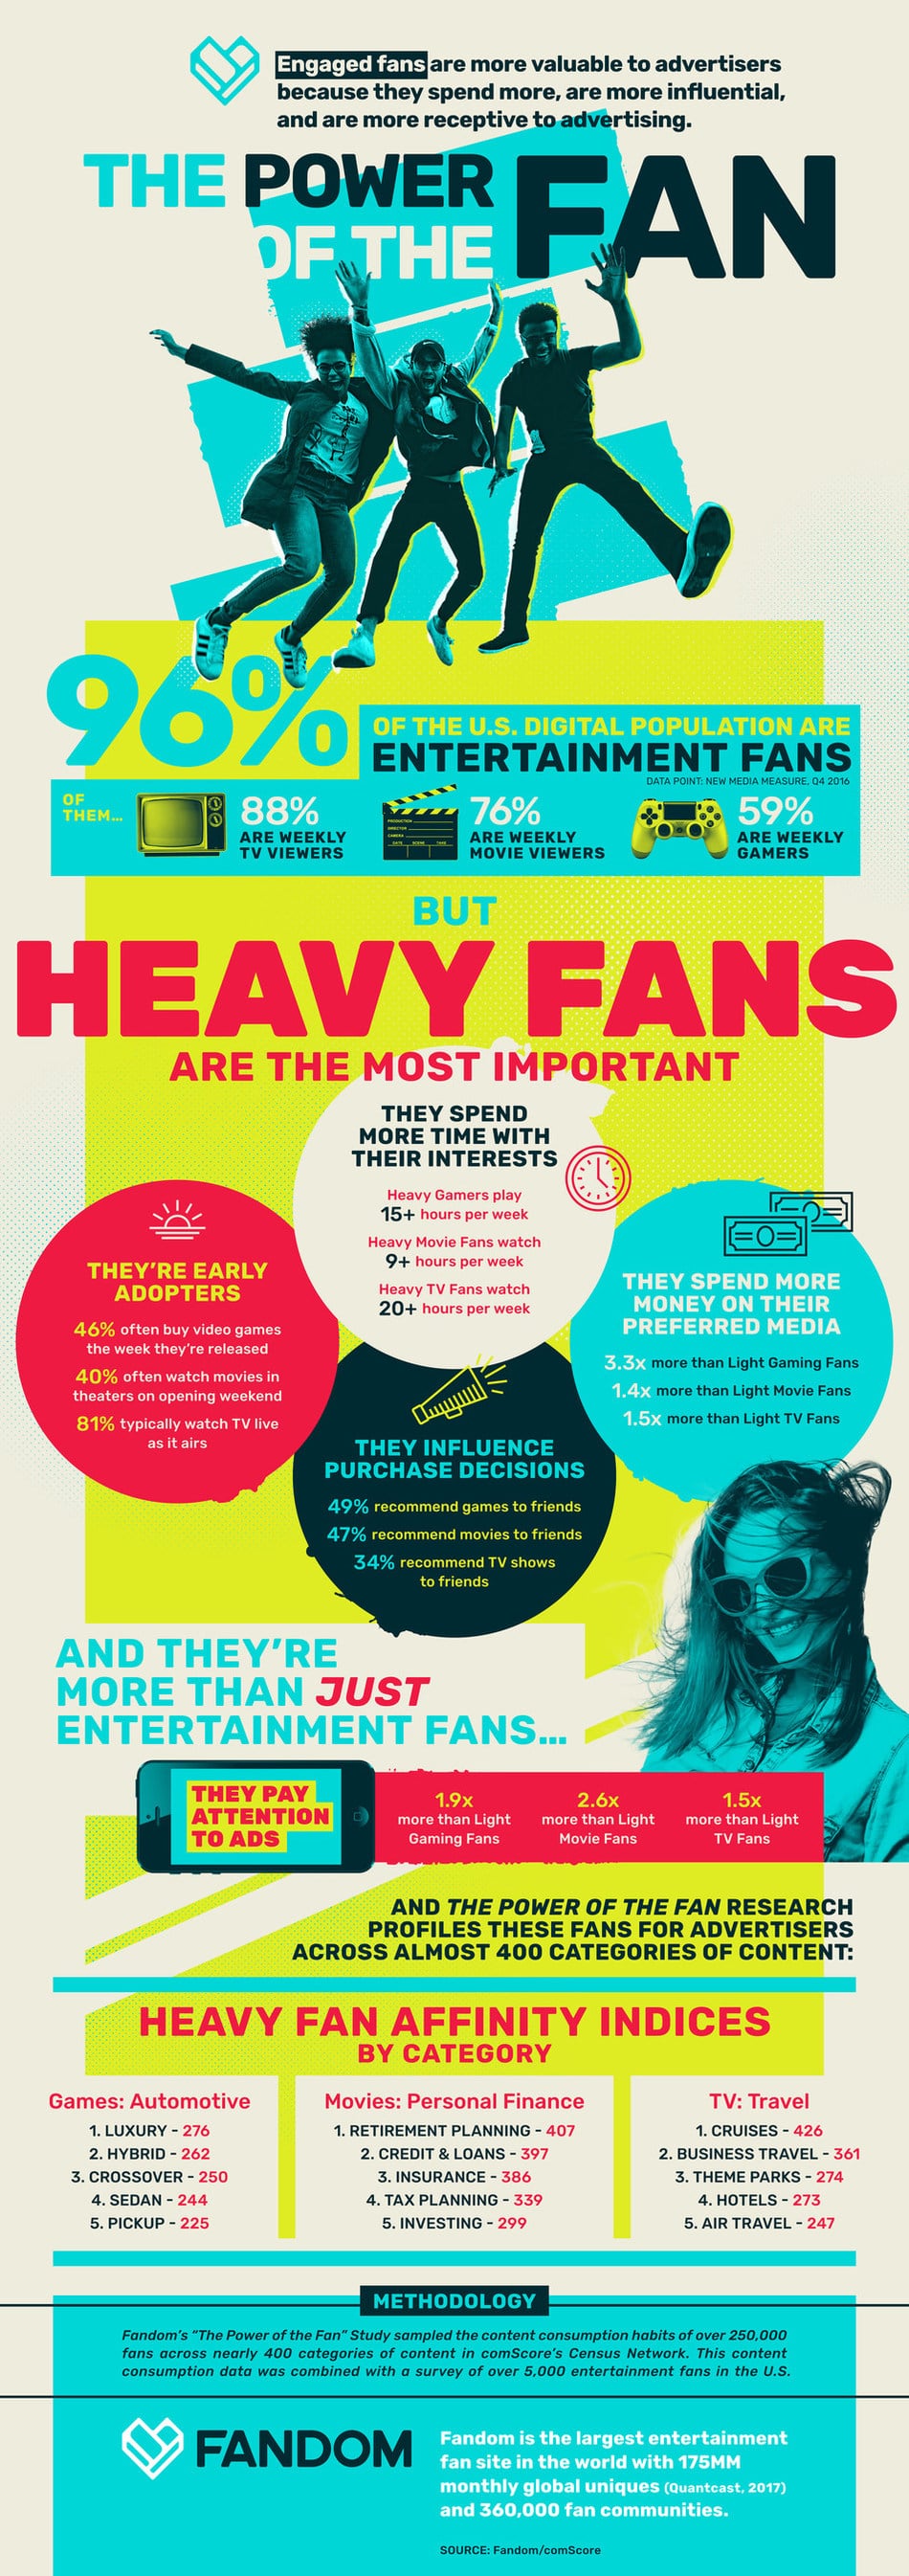 The Power of the Fan at a Glance 